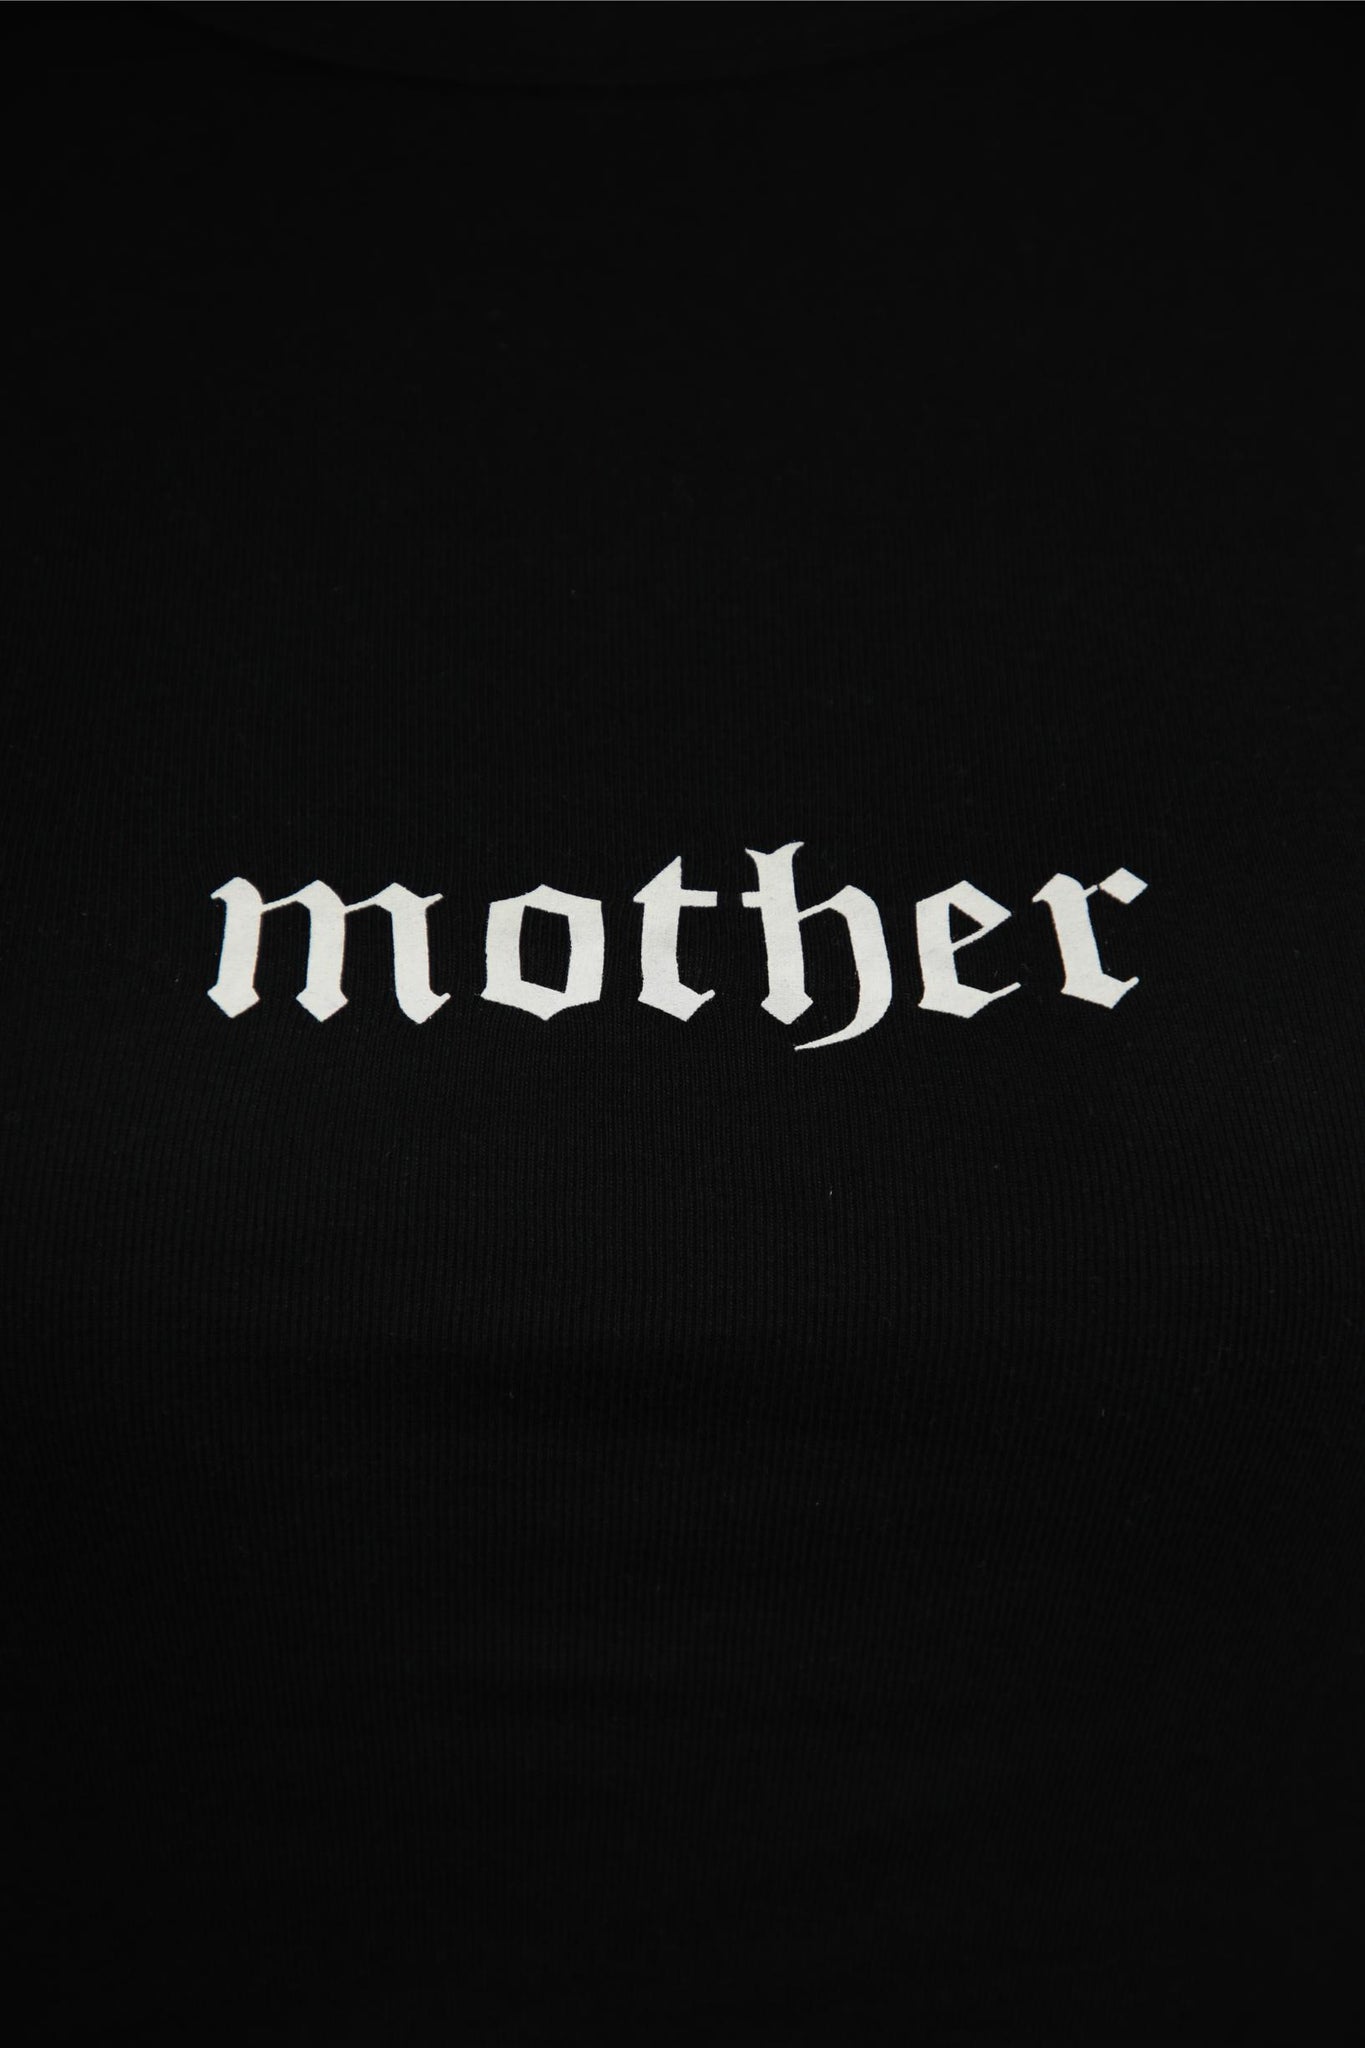 "Mother" Muscle Tank